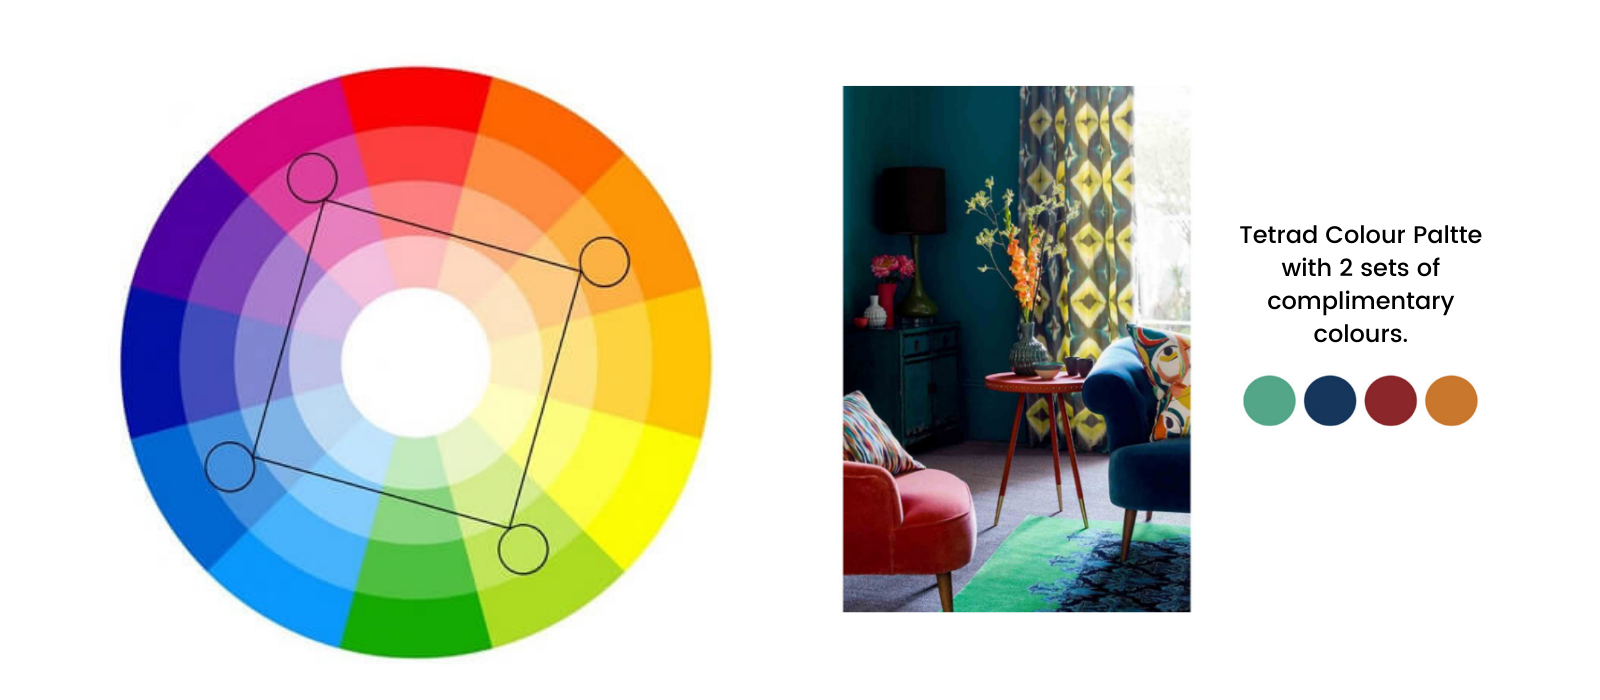 How to style your home with a Tetradic Colour Palette.